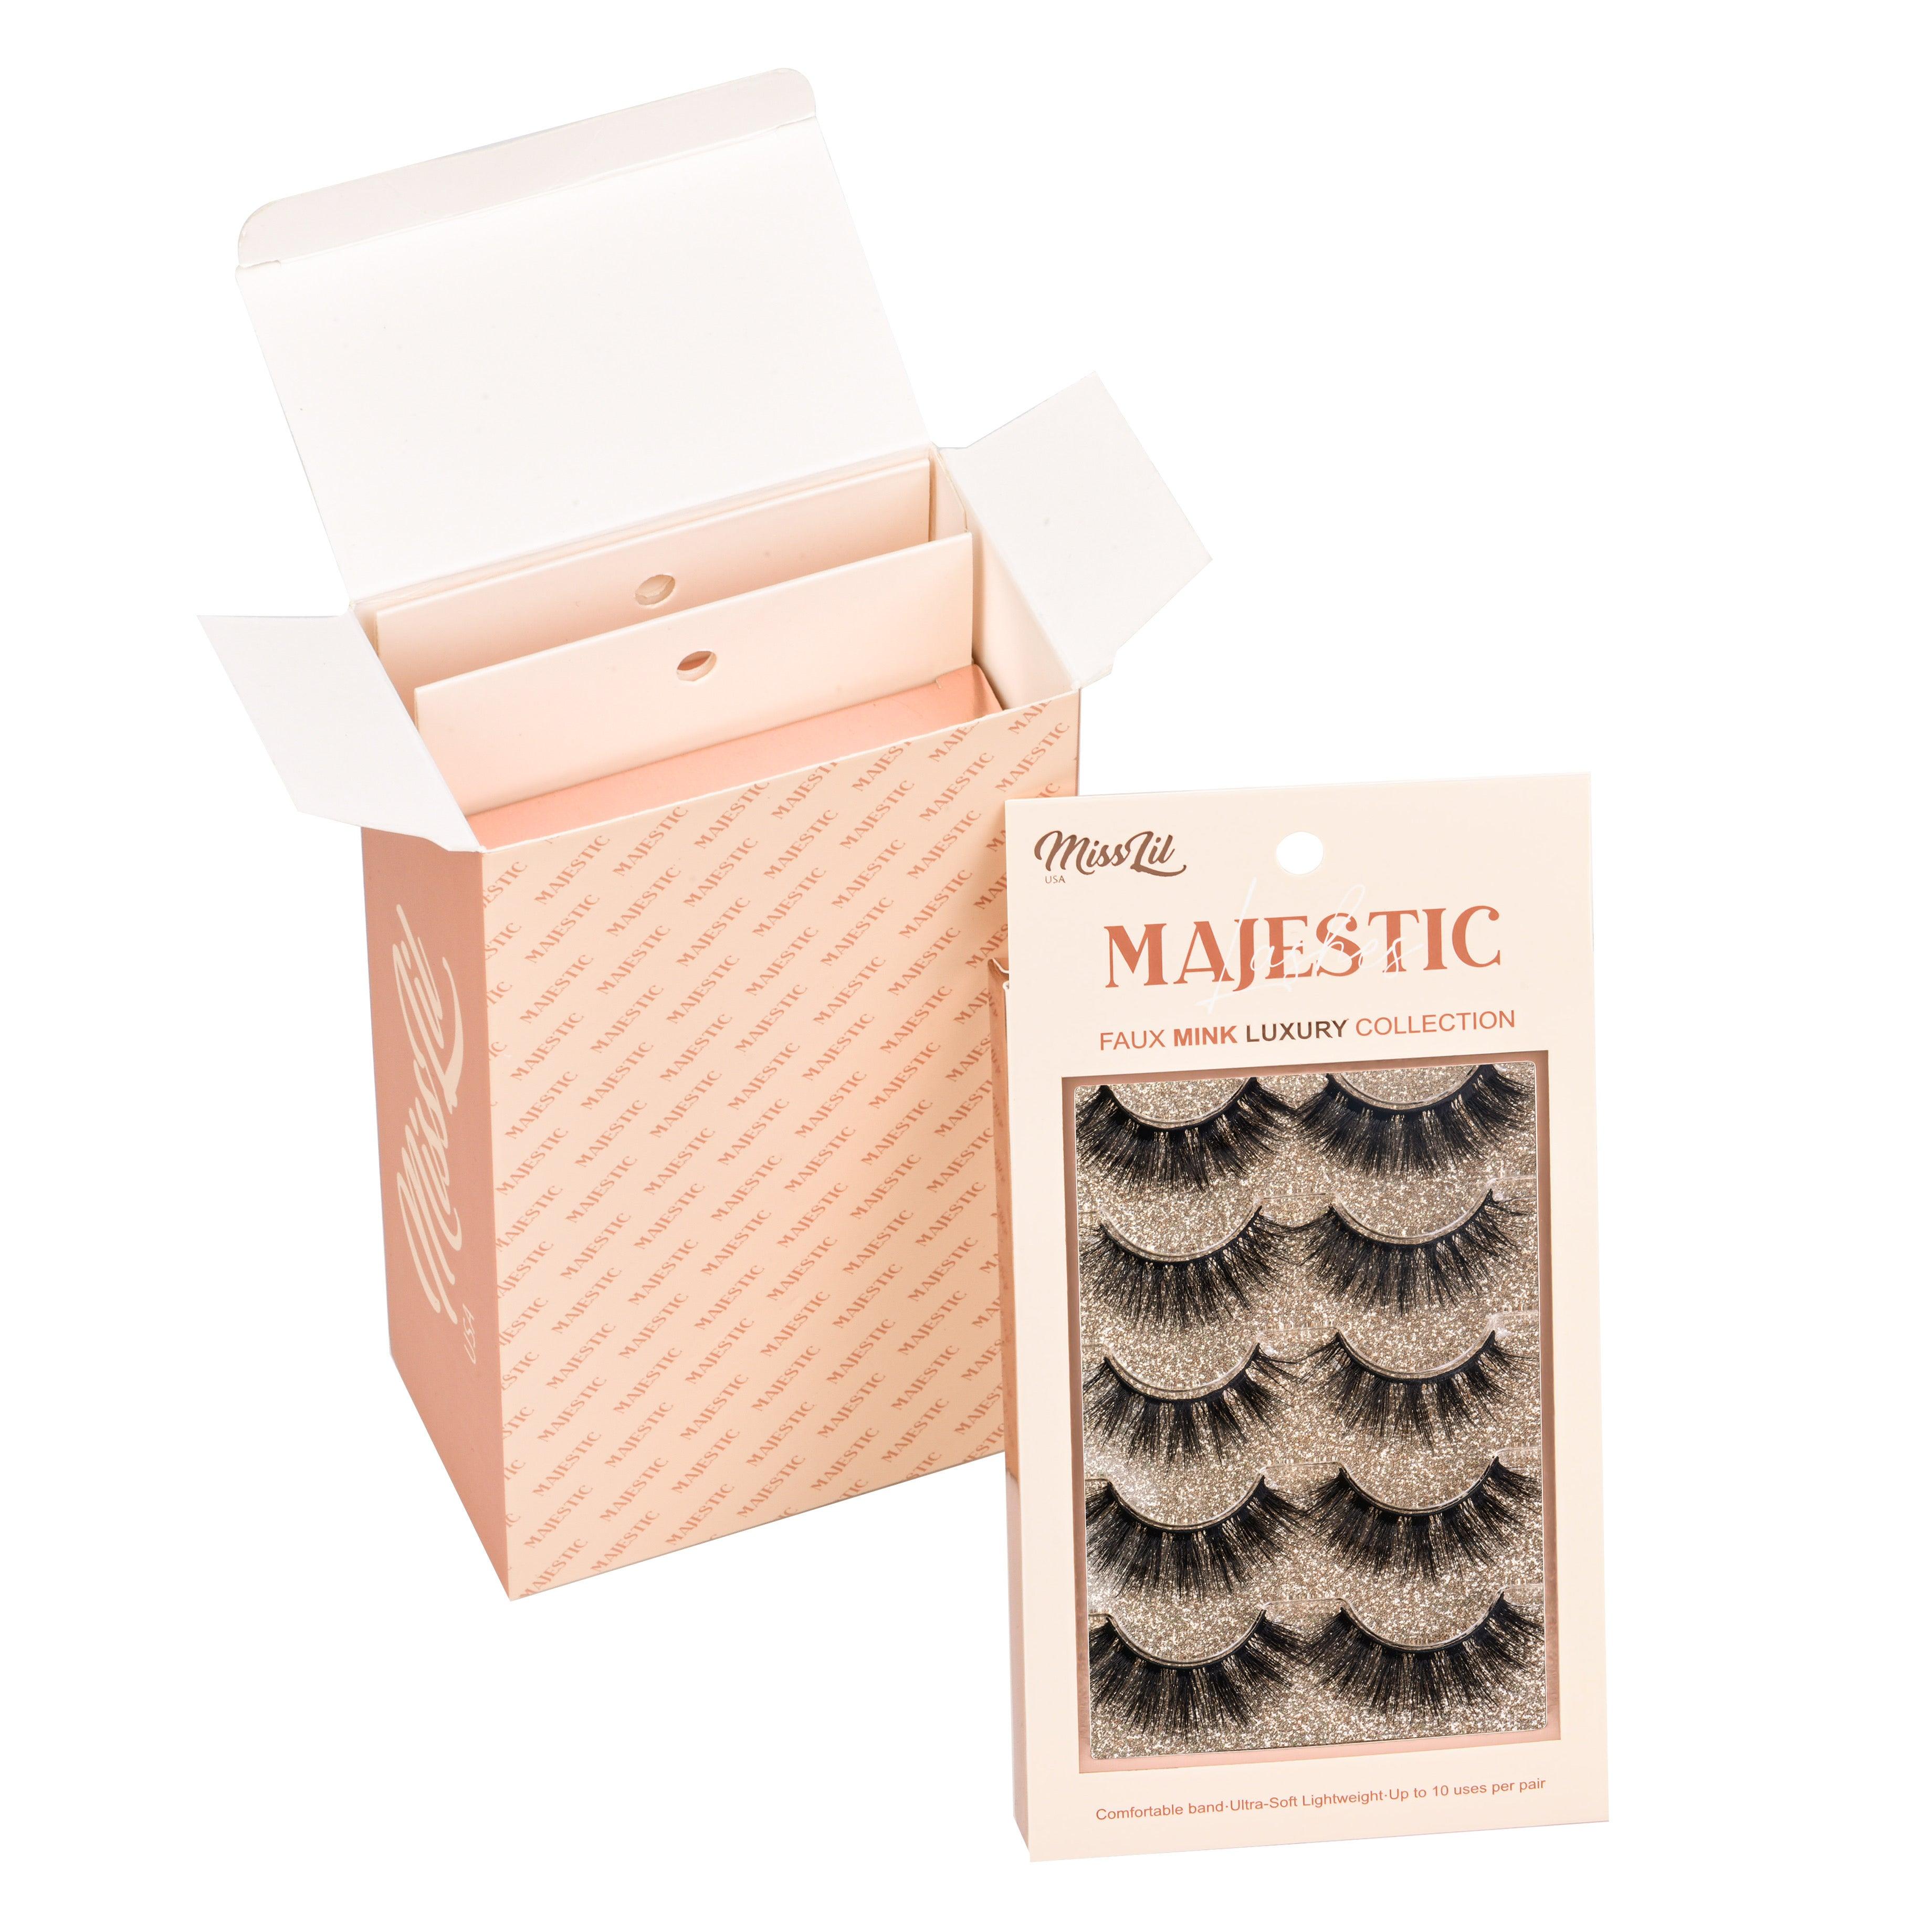 5 Pairs Majestic Lashes #12 (Pack of 6) - Miss Lil USA Wholesale